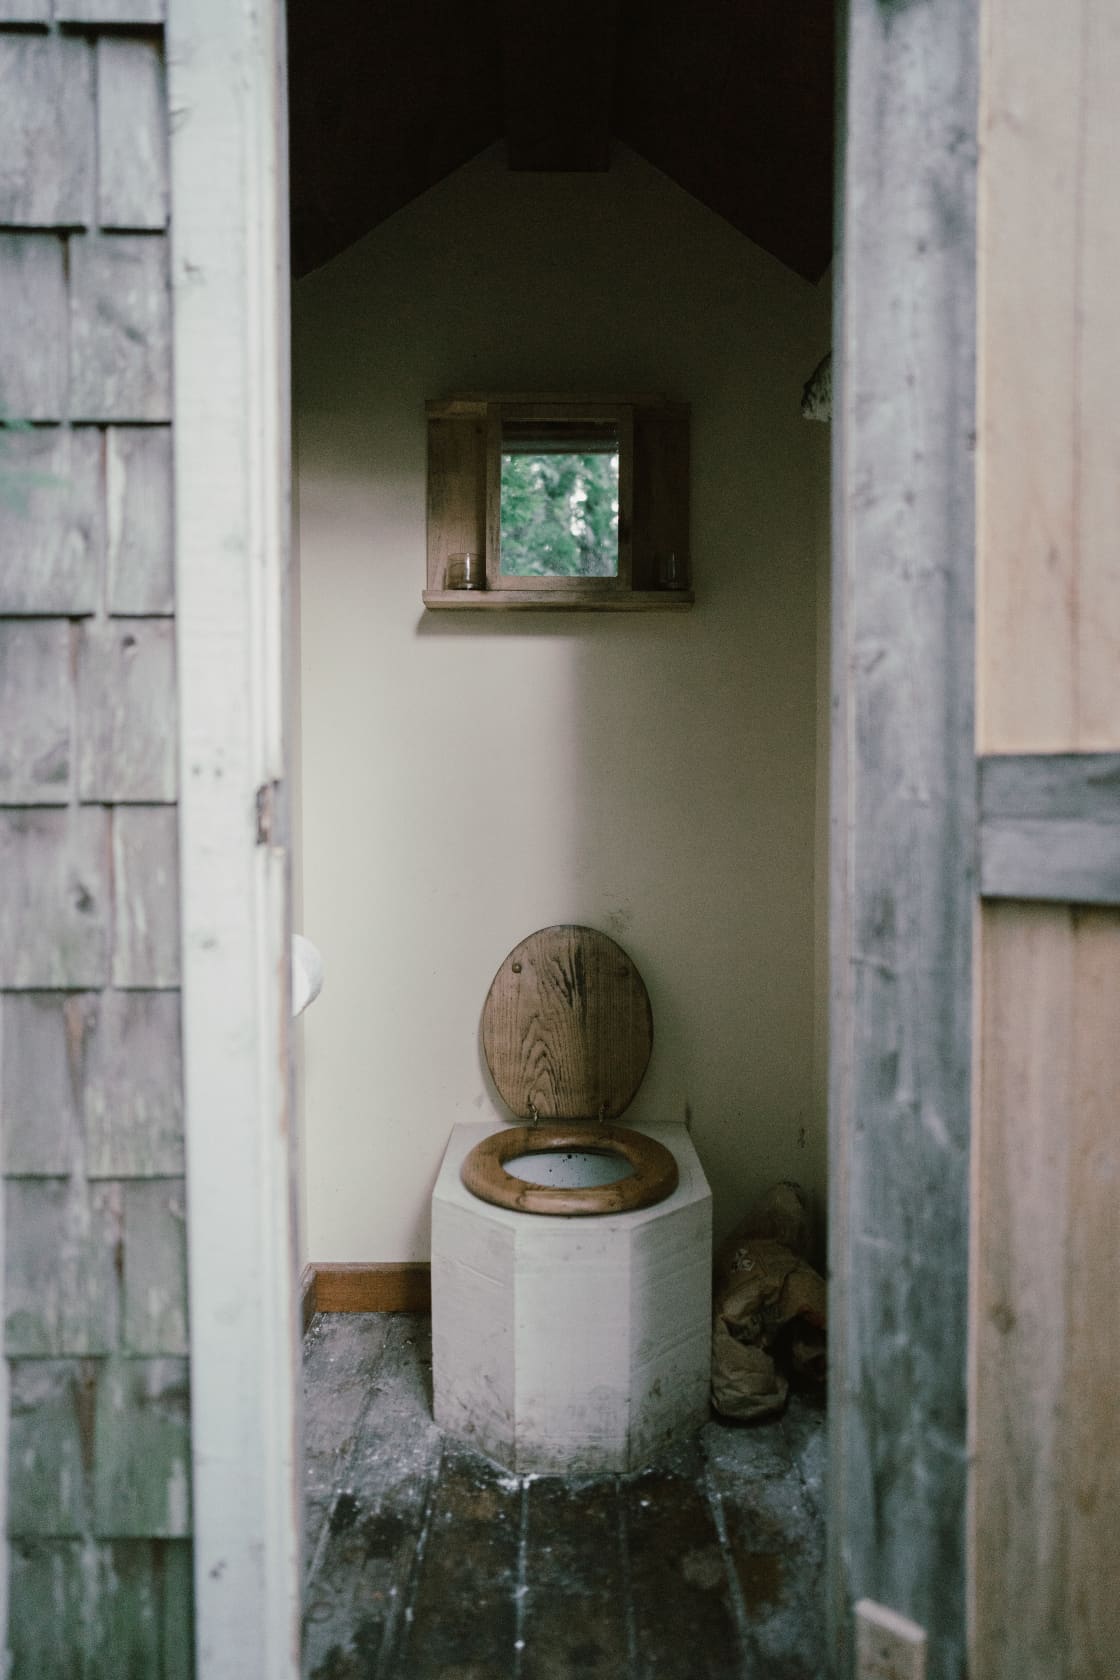 Inside of the outhouse.